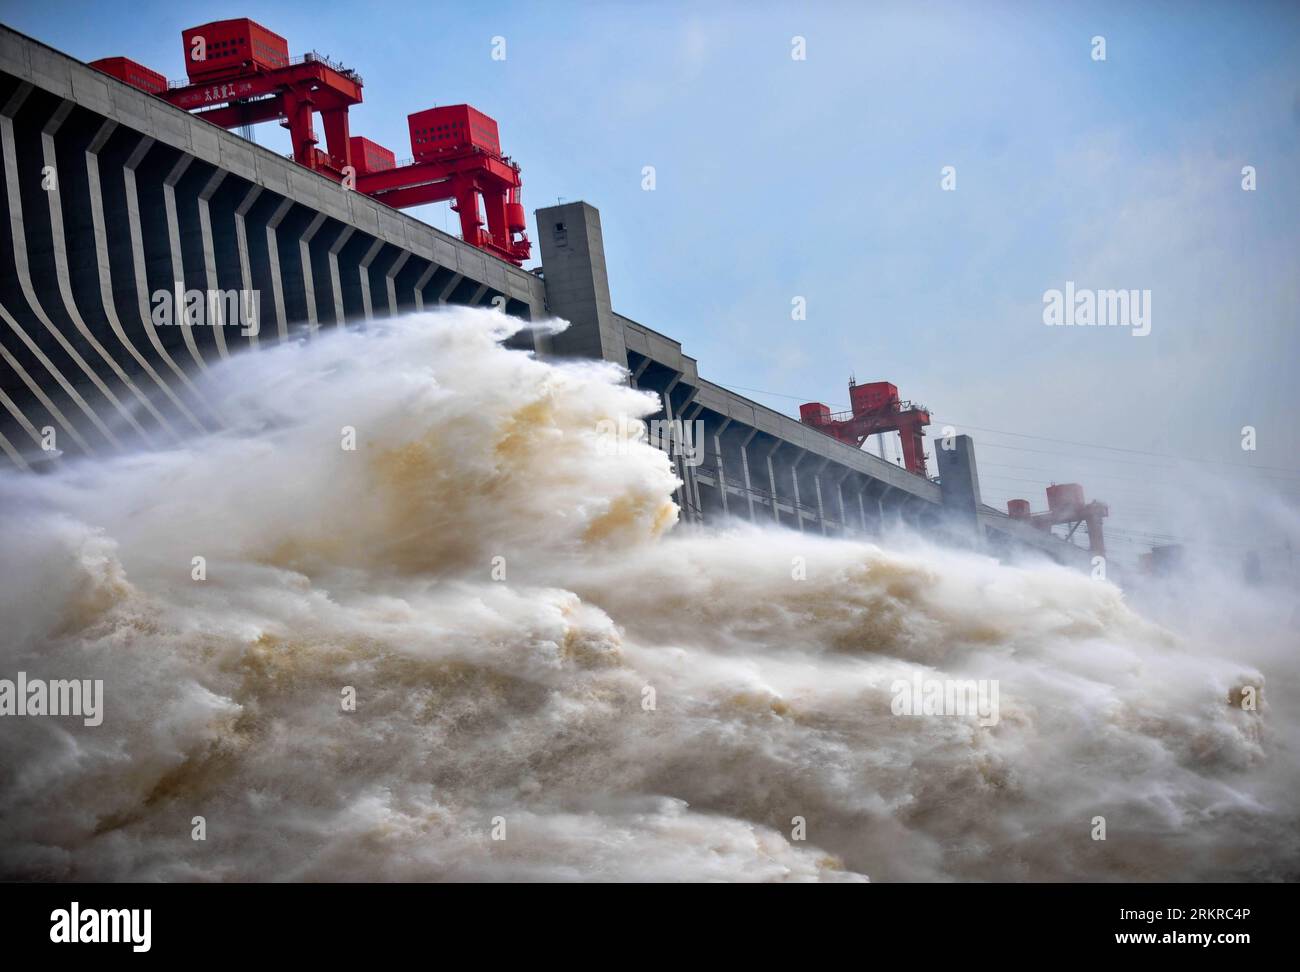 Bildnummer: 58186353  Datum: 04.07.2012  Copyright: imago/Xinhua (120704) -- WUHAN, July 4, 2012 (Xinhua) -- The Three Gorges opens its sluices for water discharge in Yichang, central China s Hubei Province, July 4, 2012. The first flood torrents passed the Three Gorges Dam safely on Wednesday with water flow of the upper Yangtze River dropping to 40,000 cubic meters per second. (Xinhua/Xiao Yijiu) (mp) CHINA-THREE GORGES-FLOOD-PASS (CN) PUBLICATIONxNOTxINxCHN Wirtschaft Versorger Dreischluchtenstaudamm Dreischluchten Staudamm Damm Schleusen offen x0x xjh premiumd 2012 quer Highlight      5818 Stock Photo